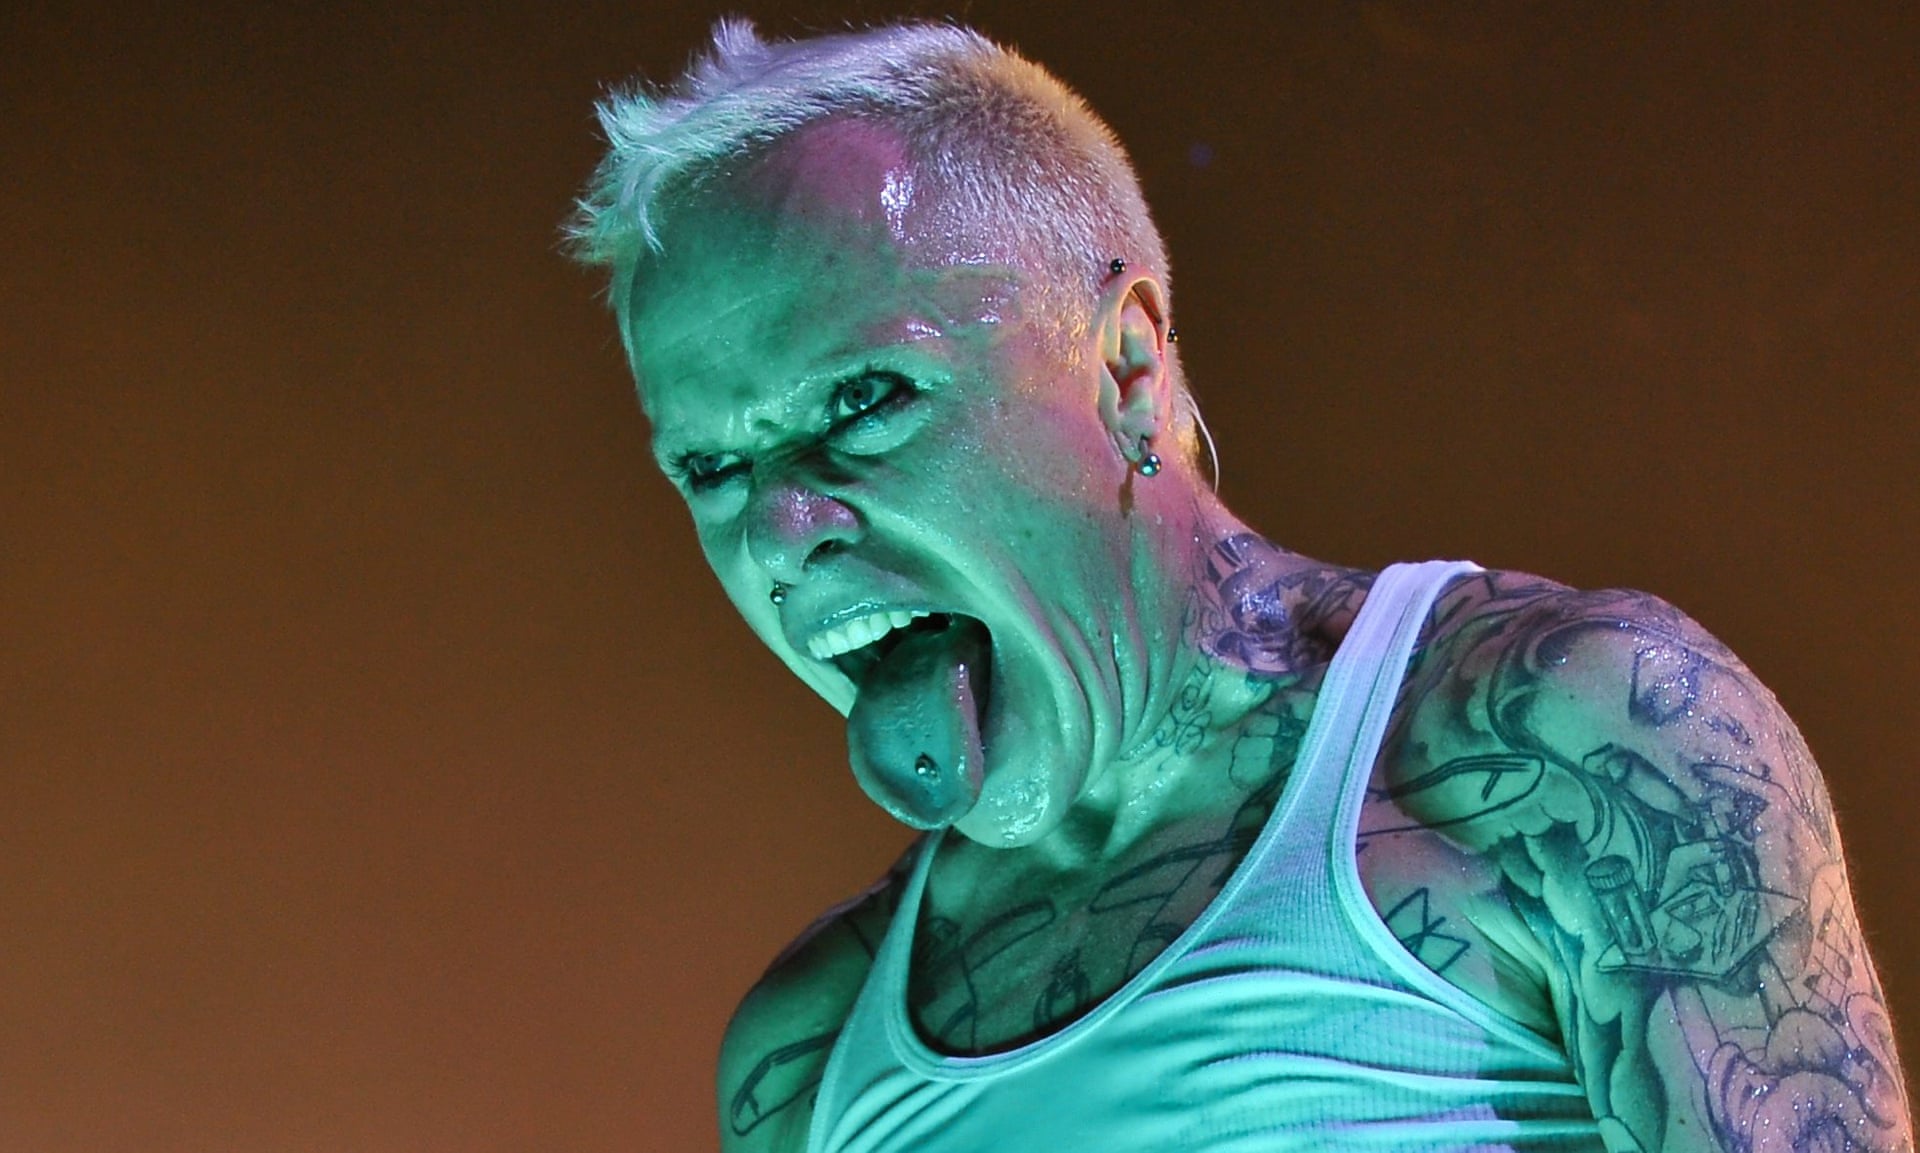 The Prodigy Singer Keith Flint Dead At 49